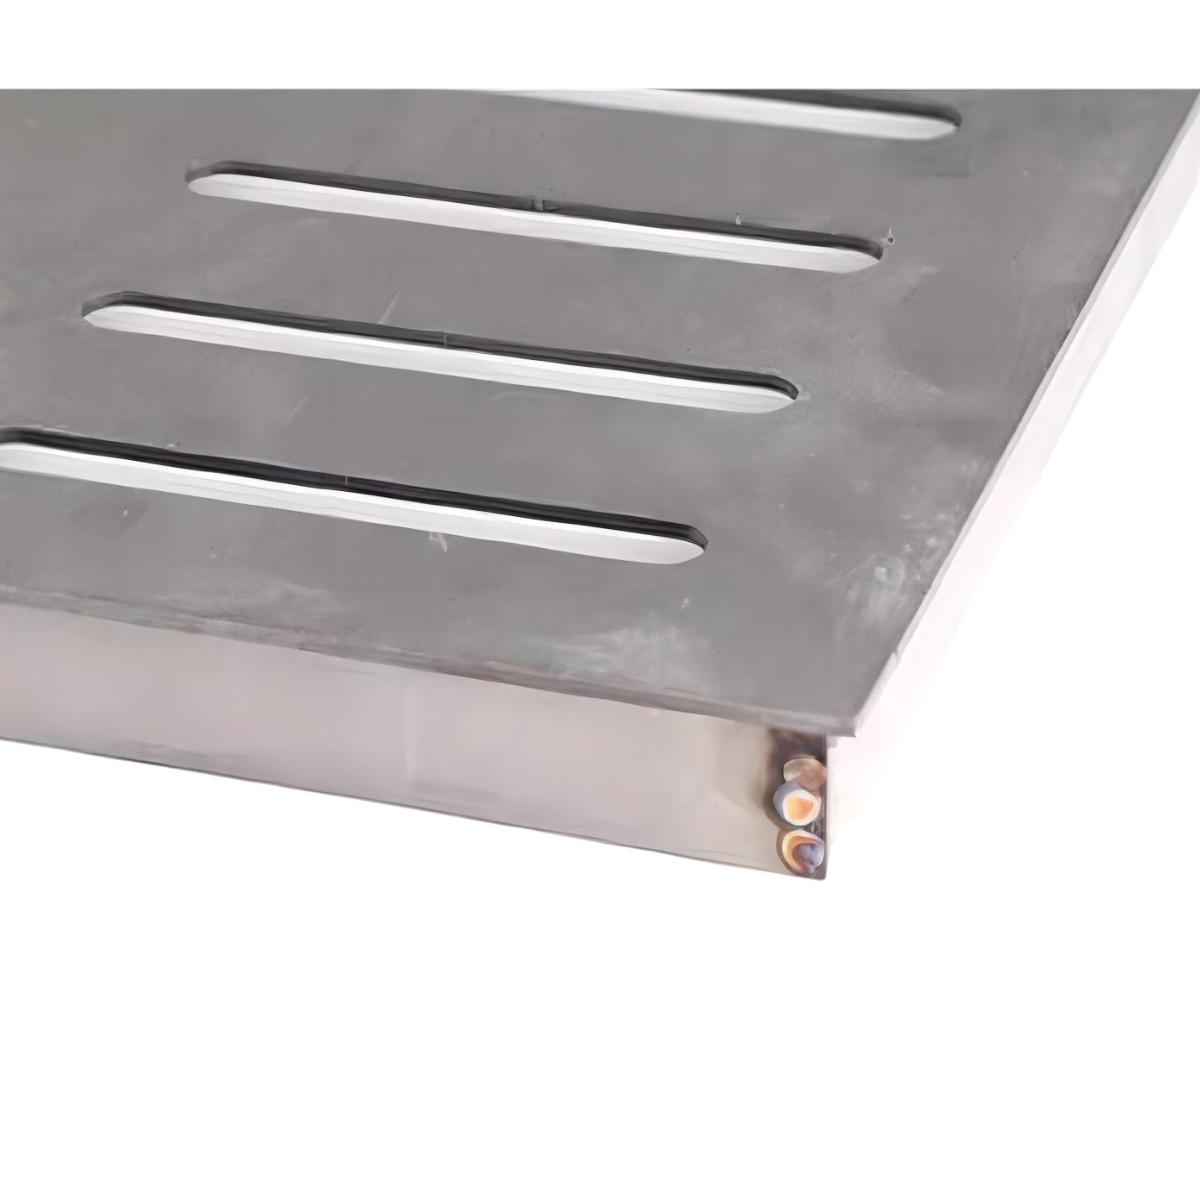 Stainless steel rain grate Water grate plate ditch spot 304 gutter cover